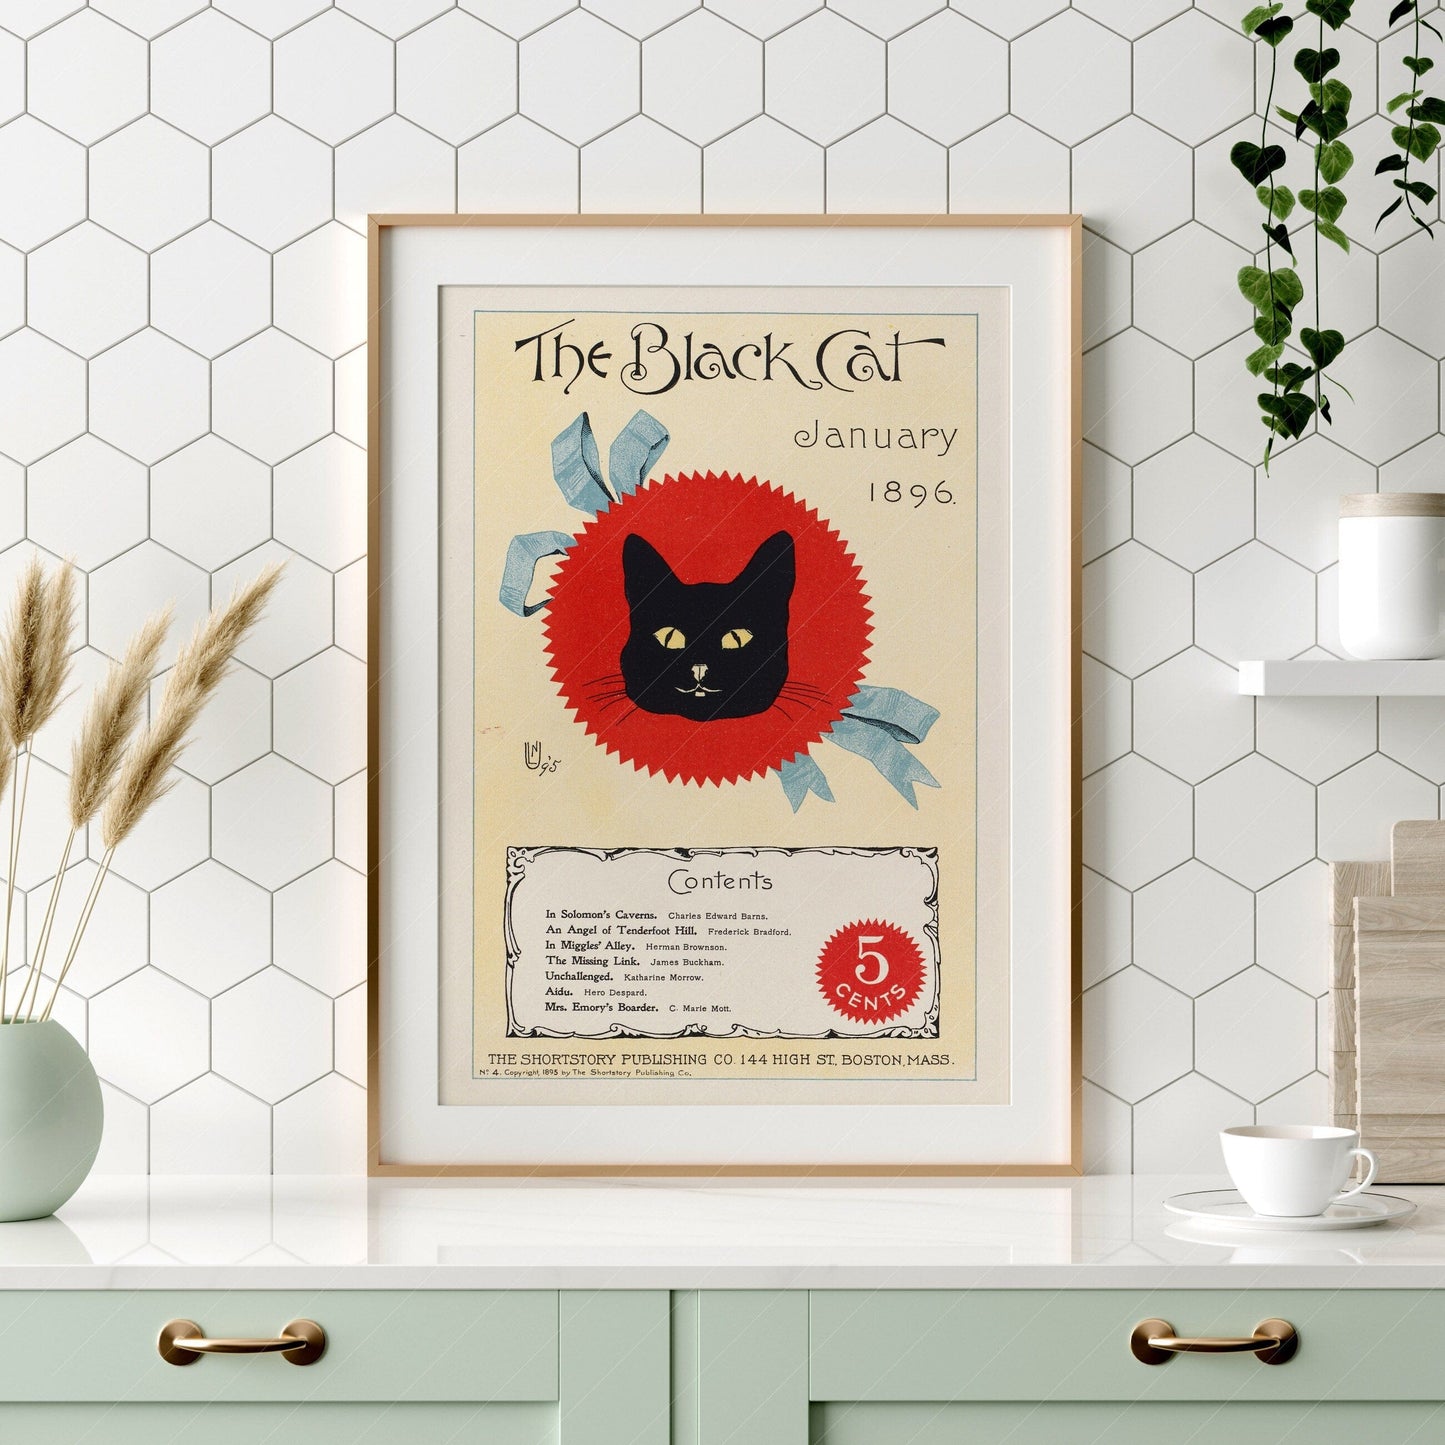 Home Poster Decor The Black Cat, Cat Lover Gift, Vintage Cat Wall Art, Cat Portrait, Animal Wall Art, Vintage Magazine, Le Chat Noir, Once Upon a Time, 1896